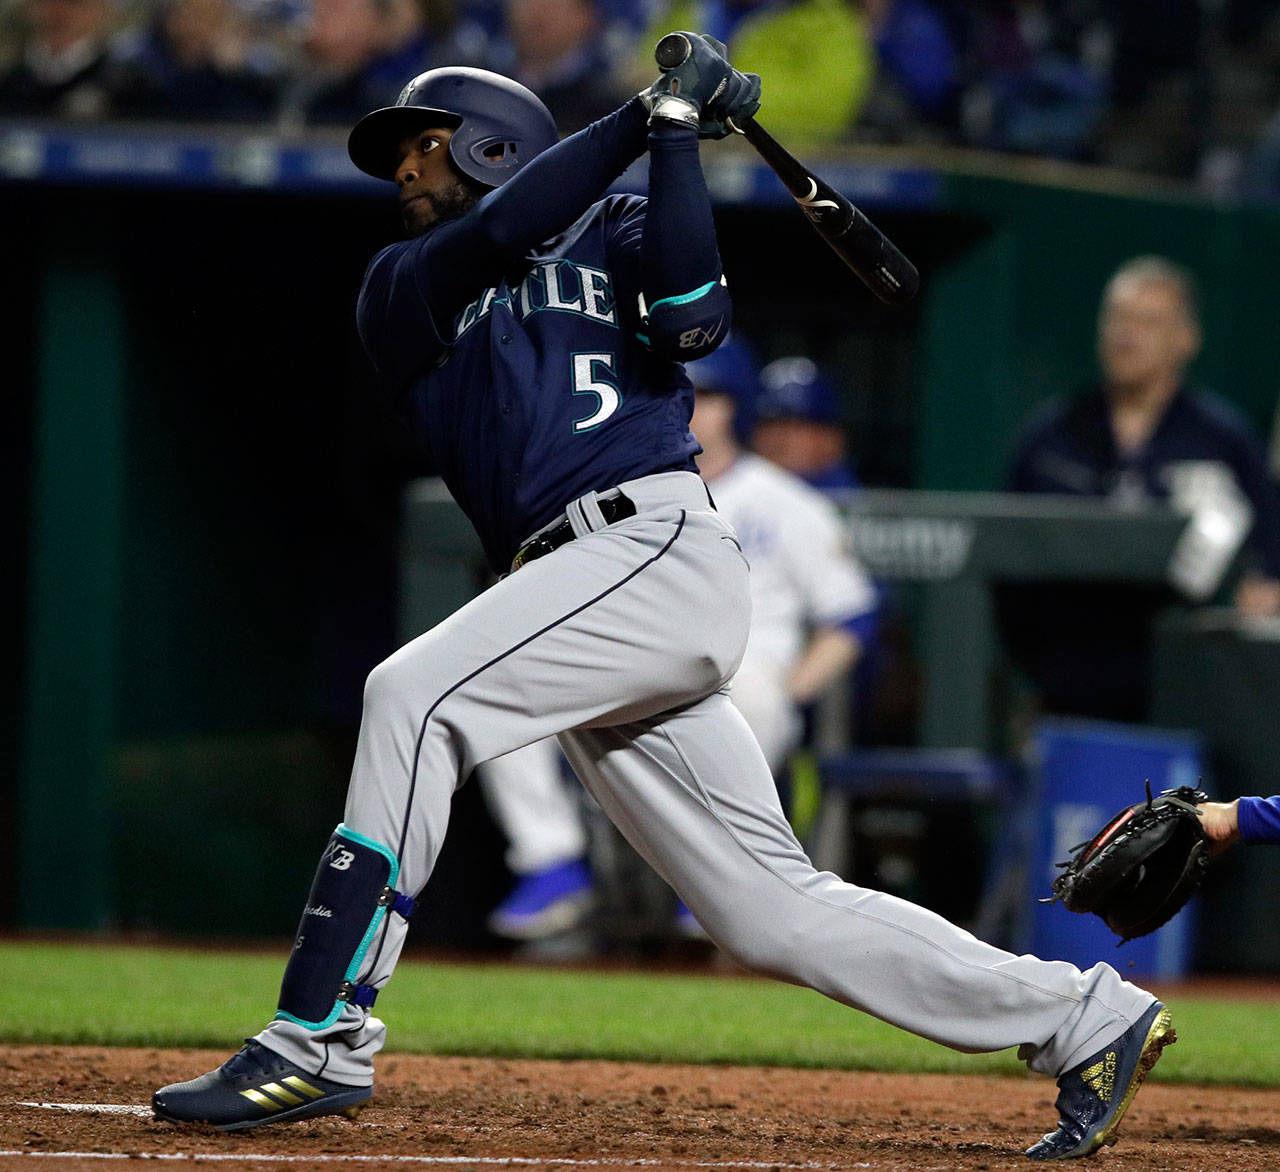 Seattle’s Guillermo Heredia hits a home run during the fifth inning of Tuesday’s game in Kansas City, Mo. (AP Photo/Orlin Wagner)